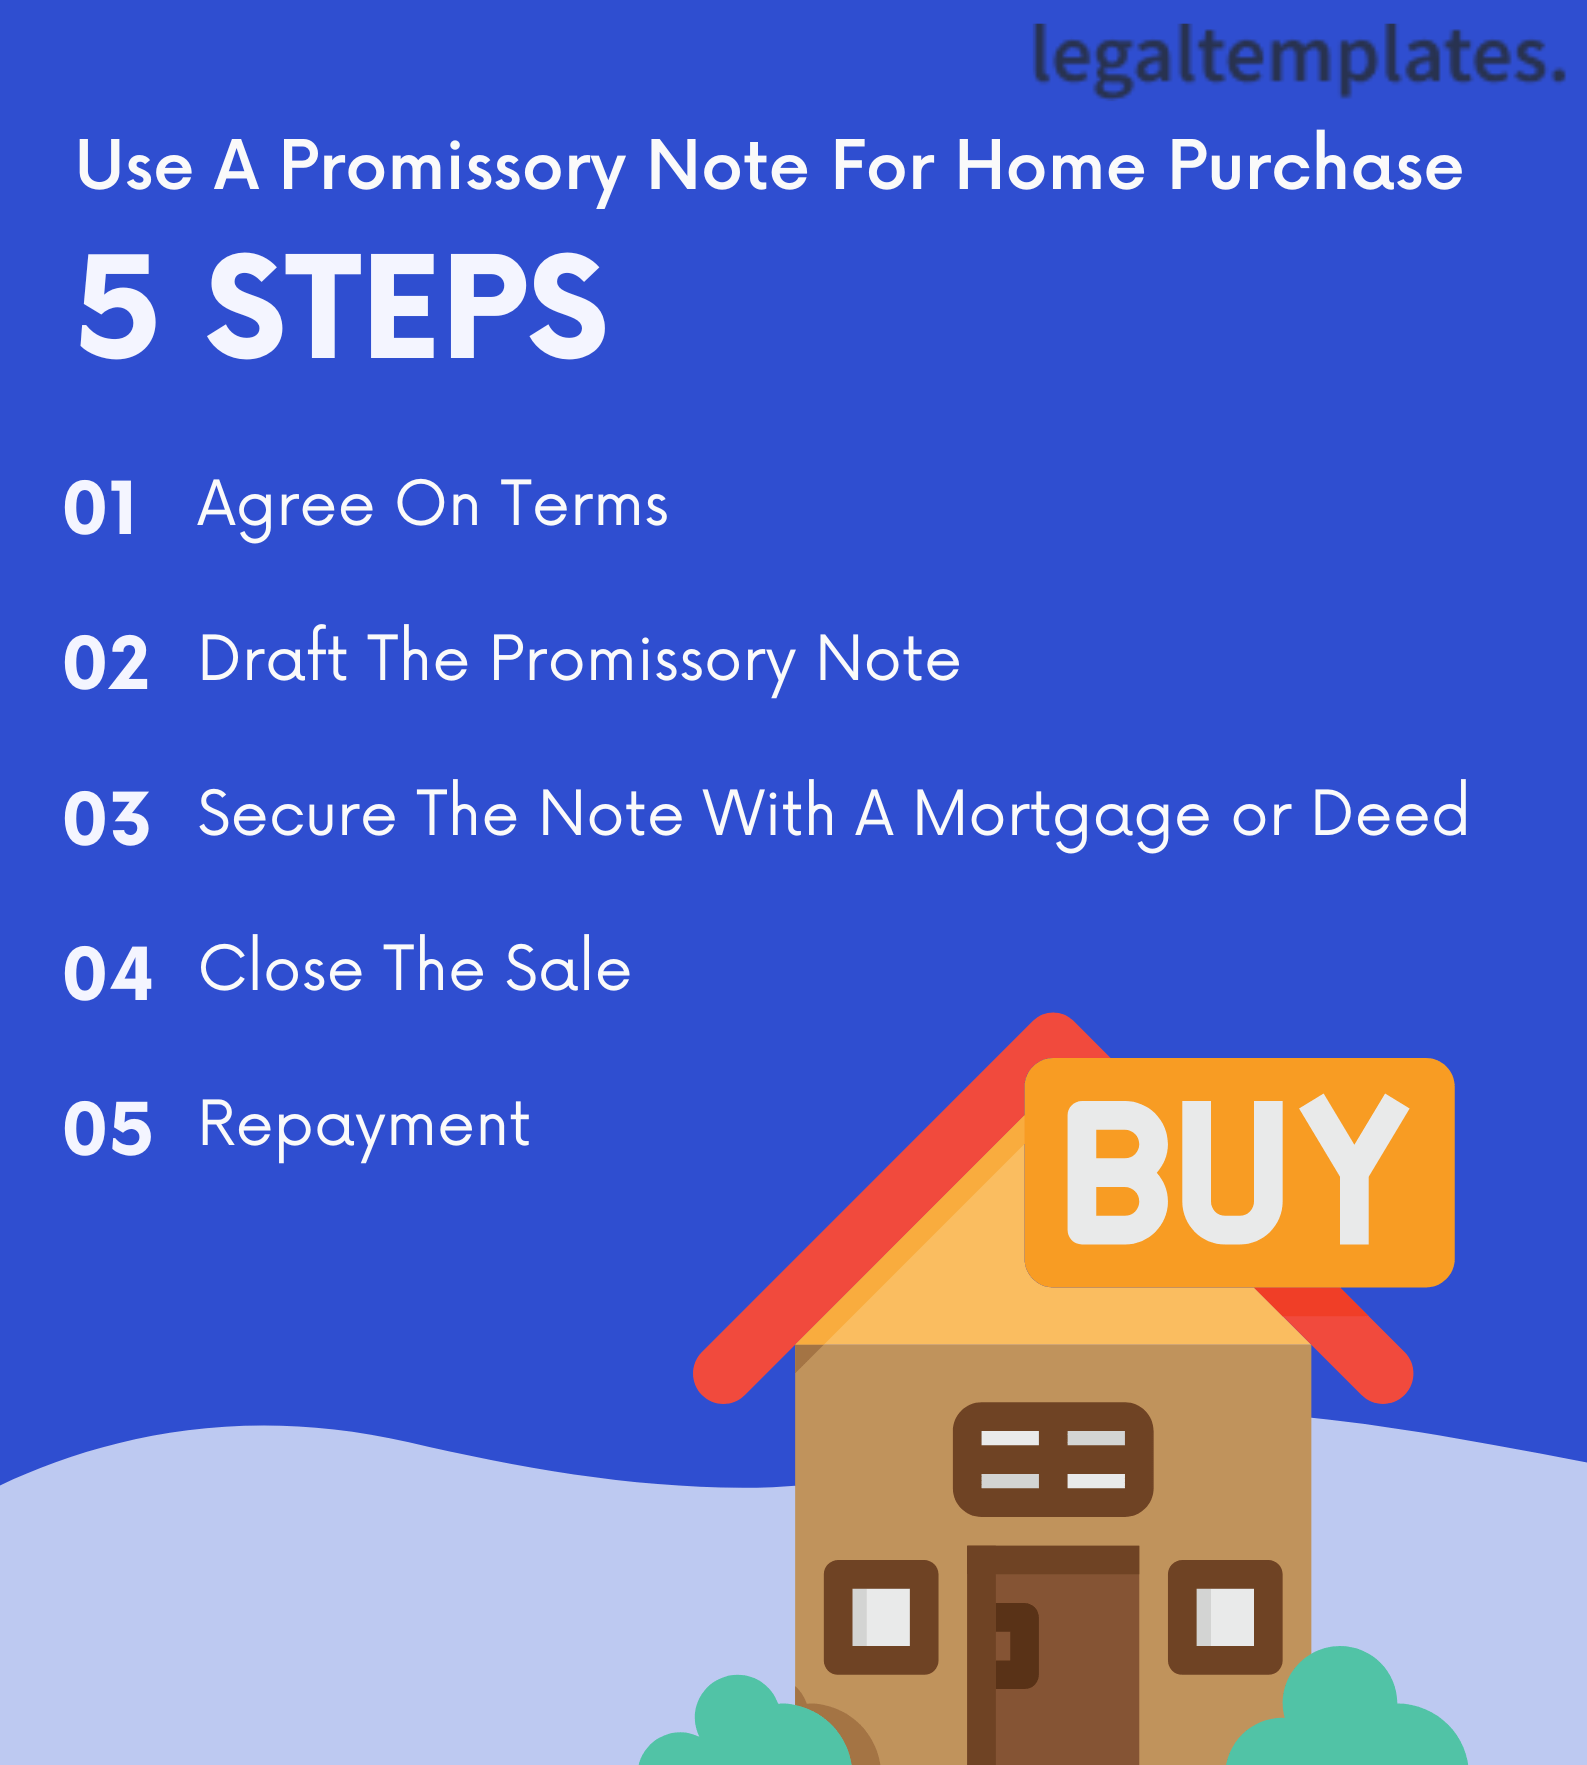 5 Steps to Purchasing a Home Using a Promissory Note Infographic